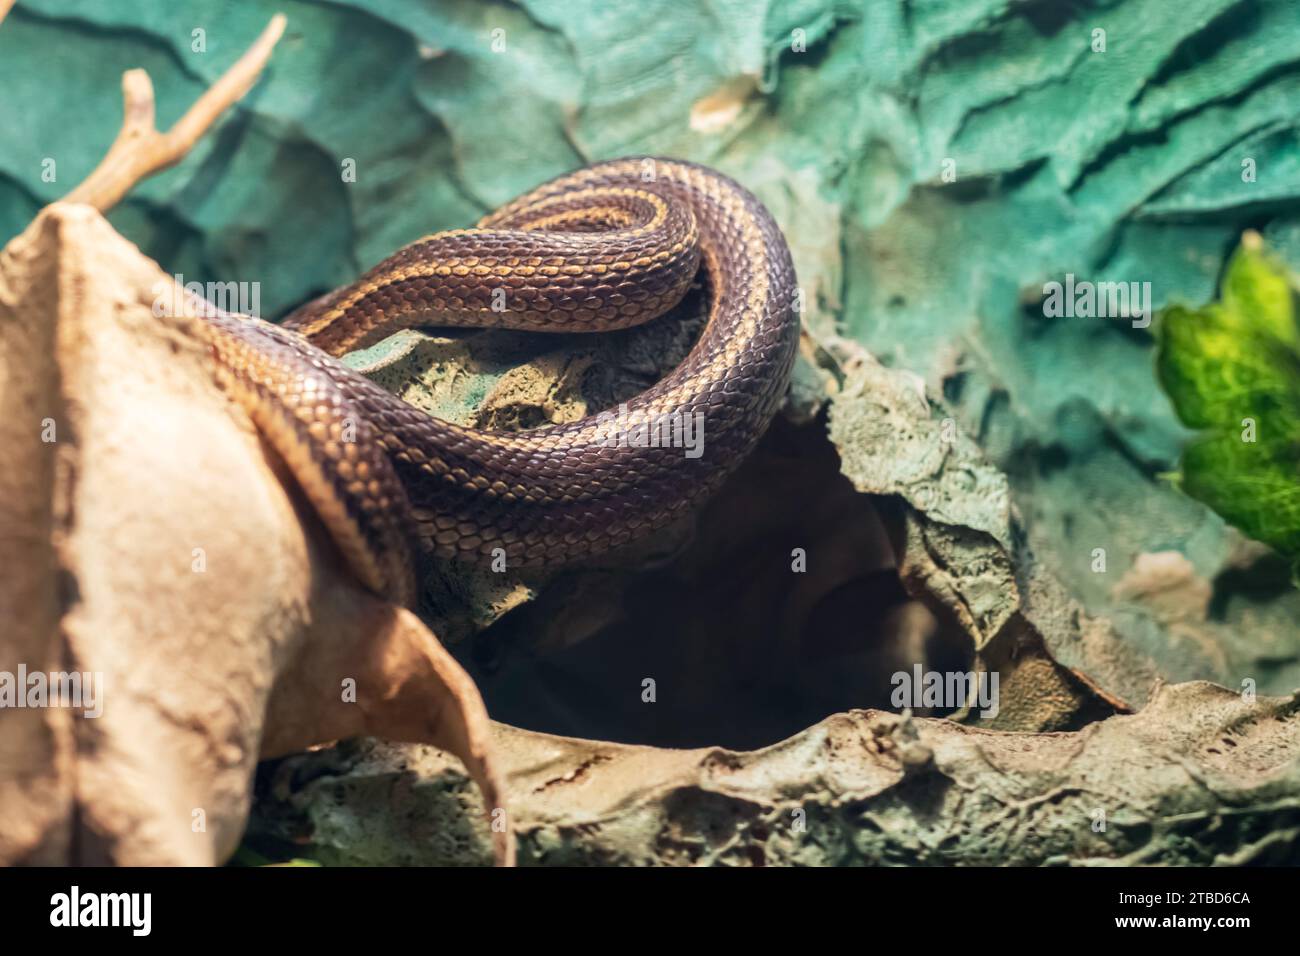 Small brown snake in a terrarium close up Stock Photo